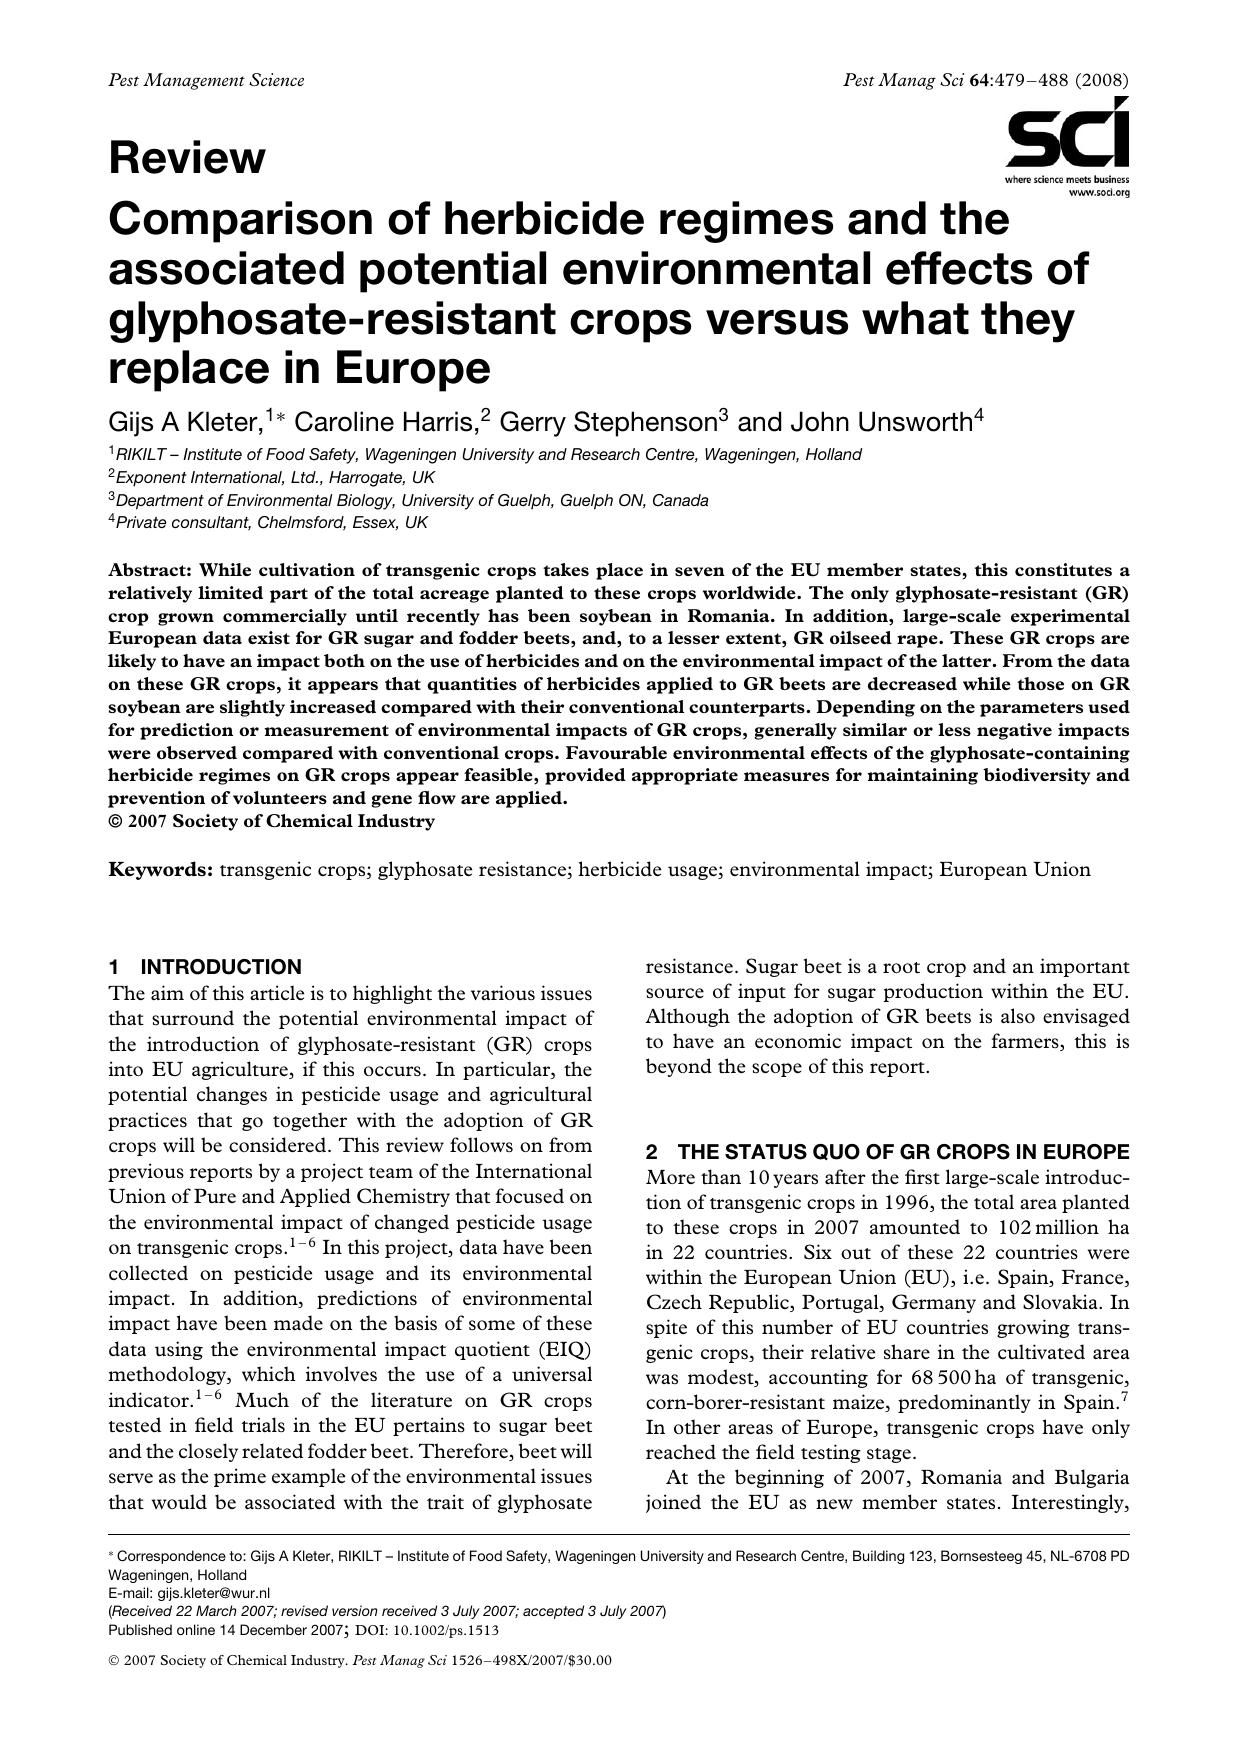 Comparison of herbicide regimes and the associated potential environmental effects of glyphosate-resistant crops versus what they replace in Europe by Unknown